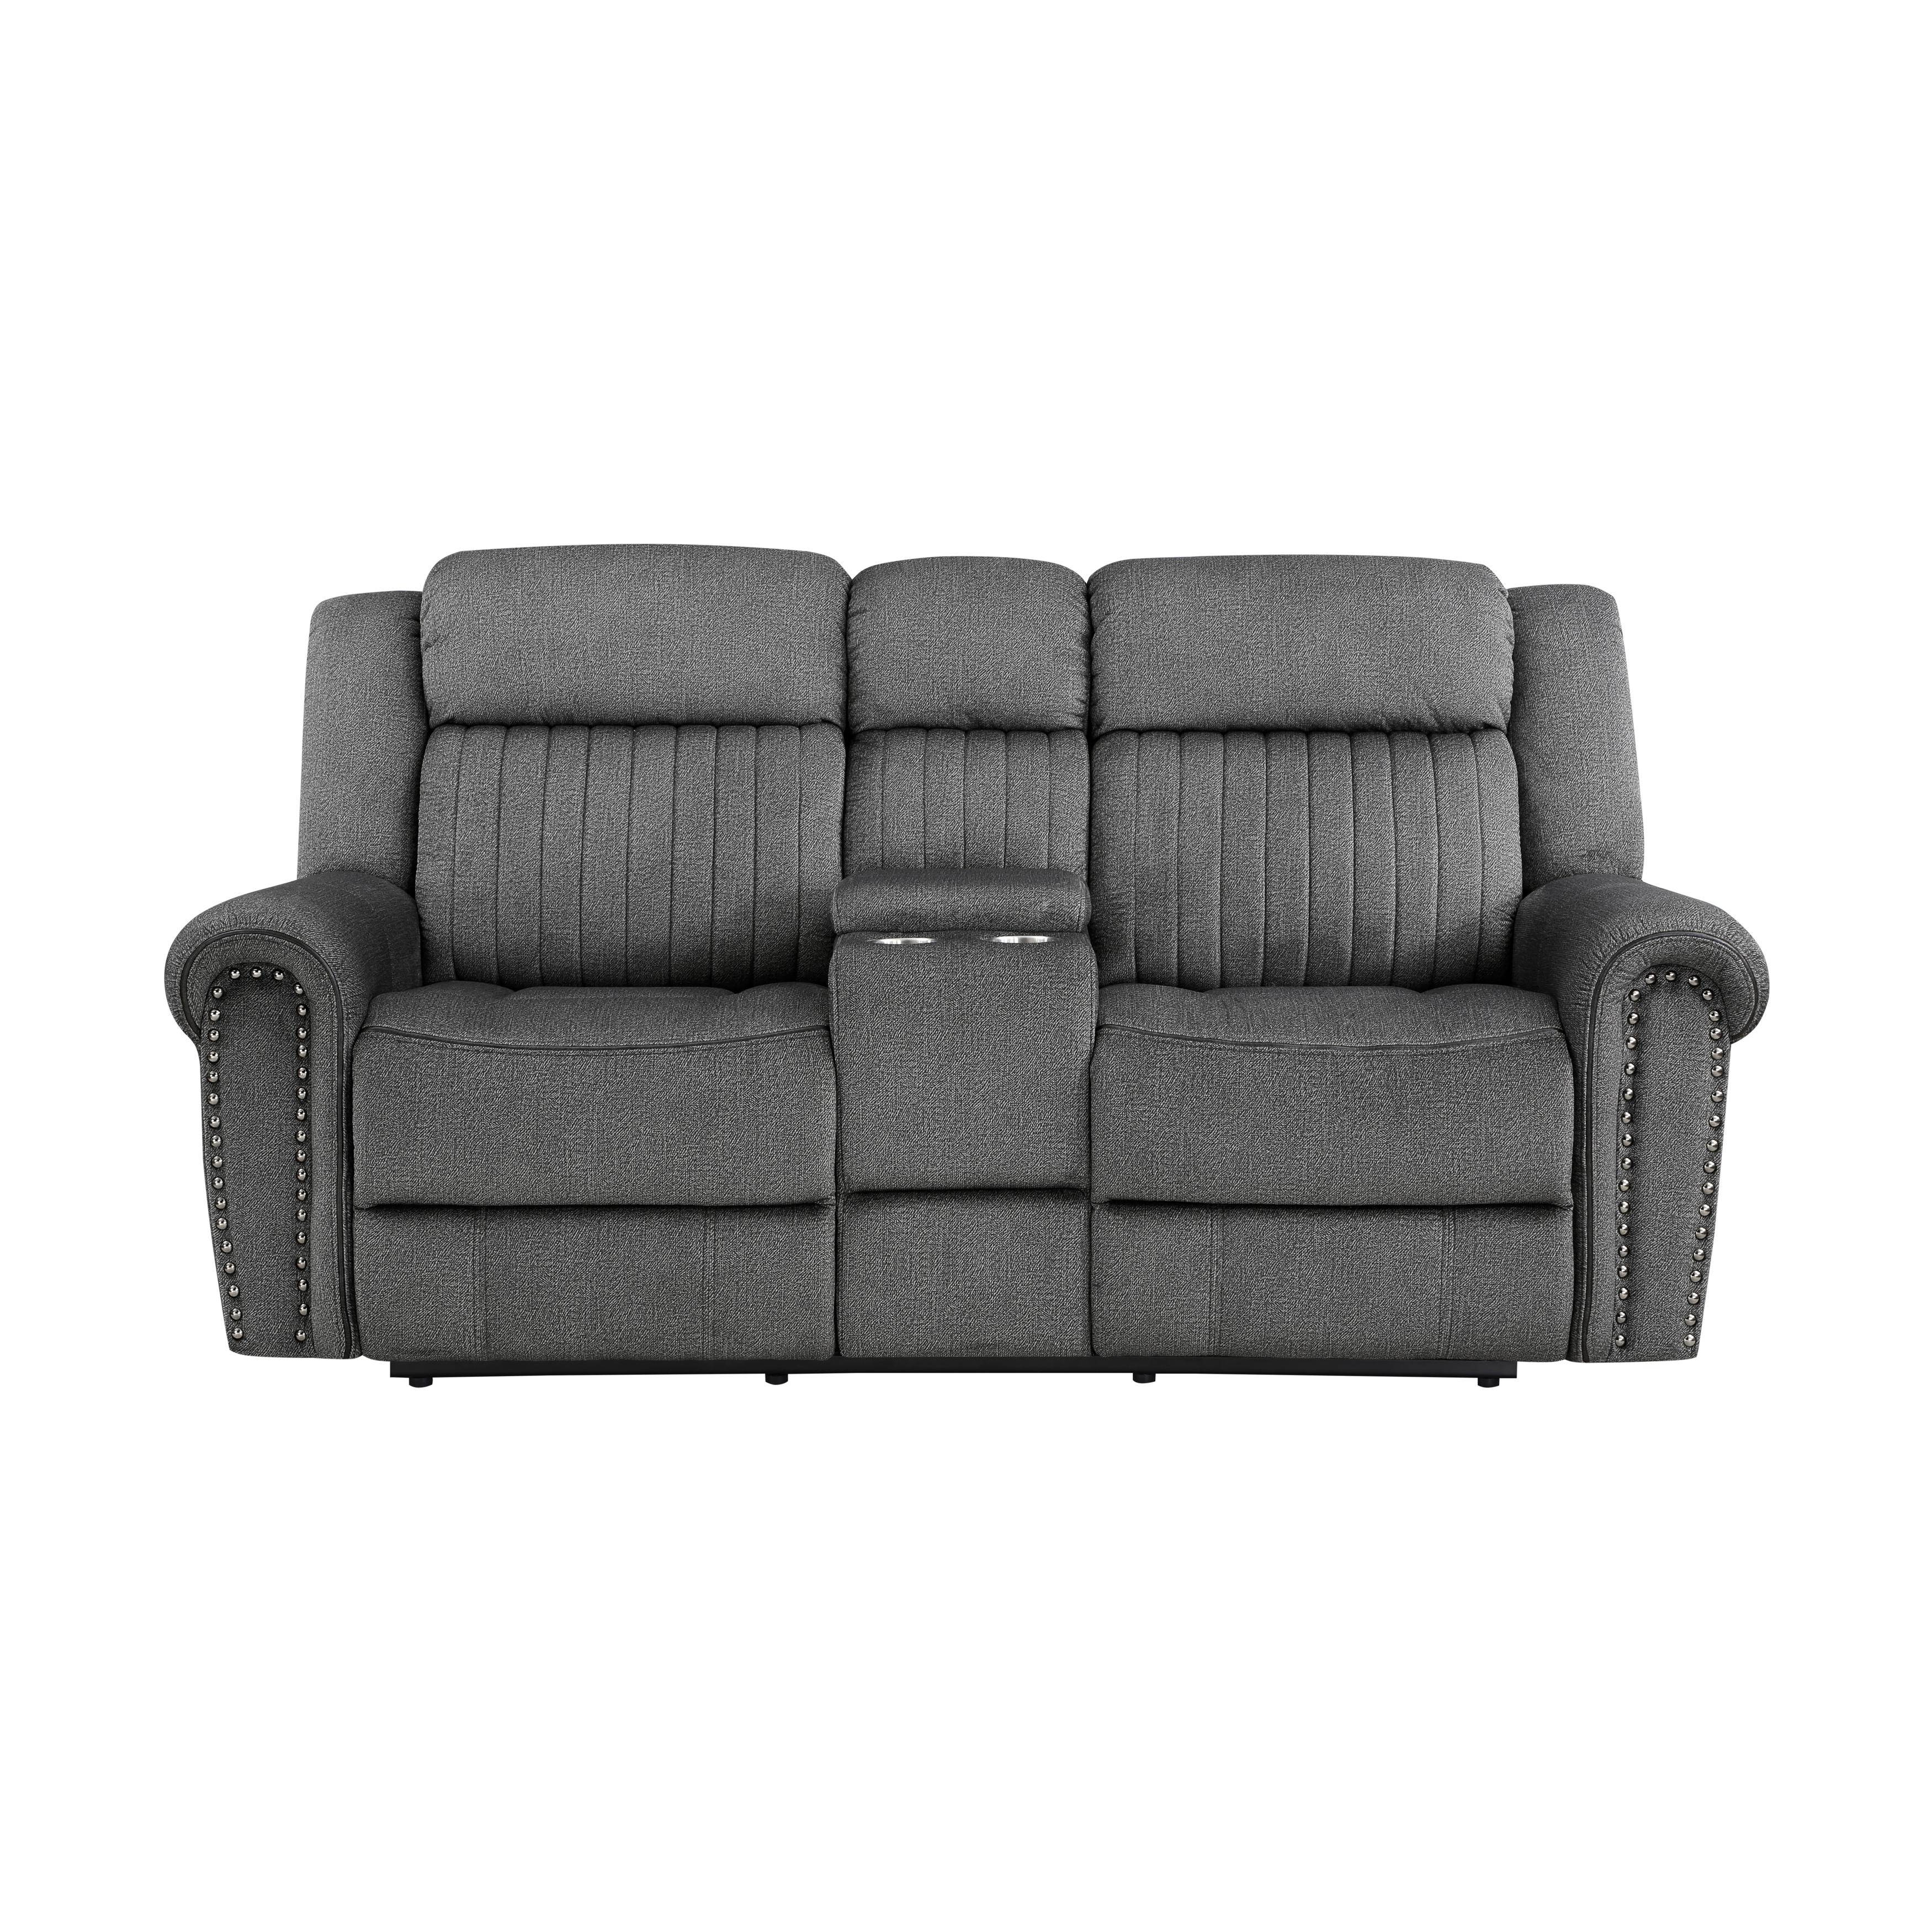 Transitional Power Reclining Loveseat 9204CC-2PW Brennen 9204CC-2PW in Charcoal Microfiber